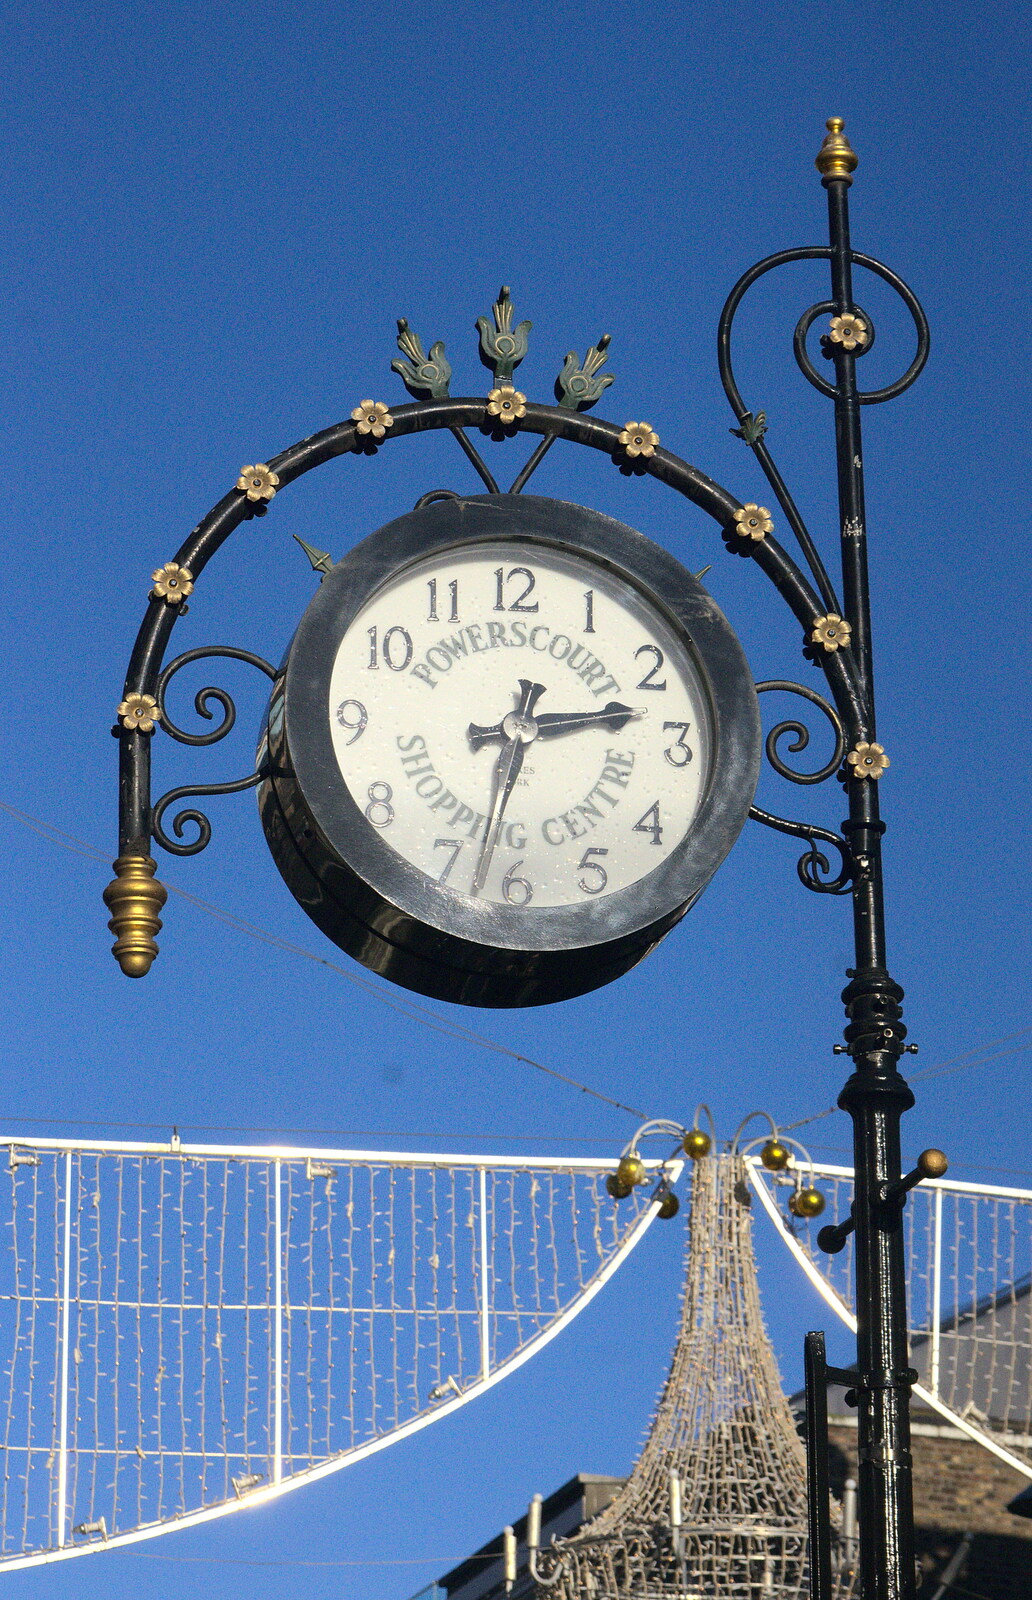 Ornate clock from Christmas Eve in Dublin and Blackrock, Ireland - 24th December 2015